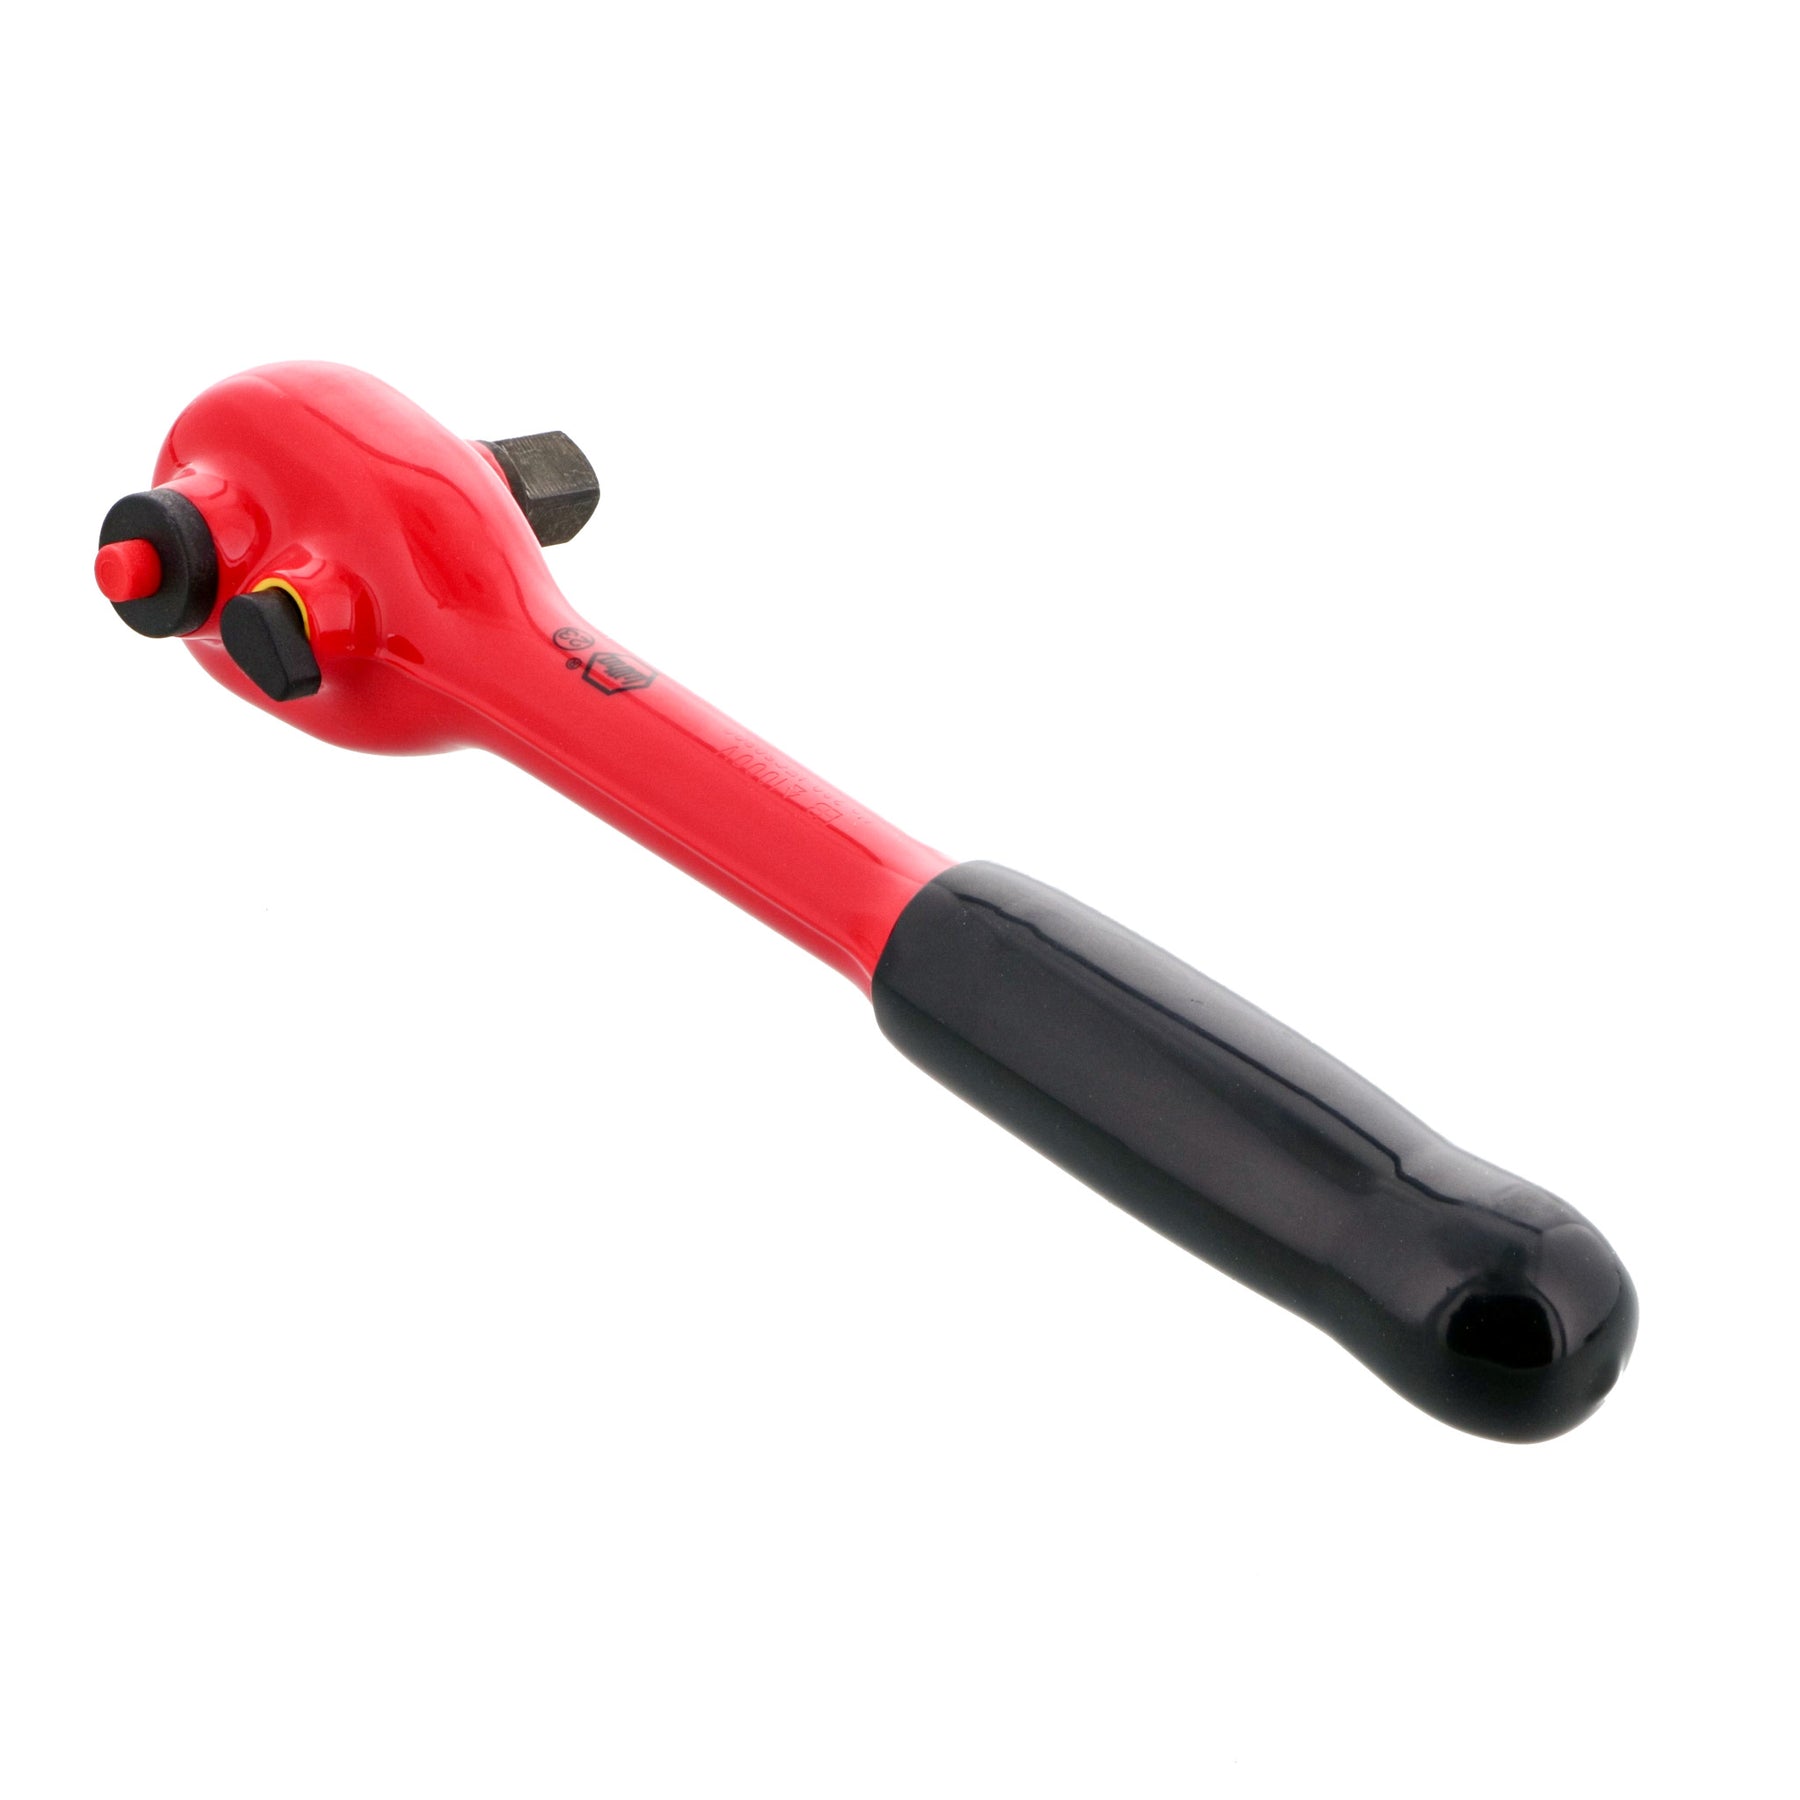 Insulated 1/2" Drive Ratchet